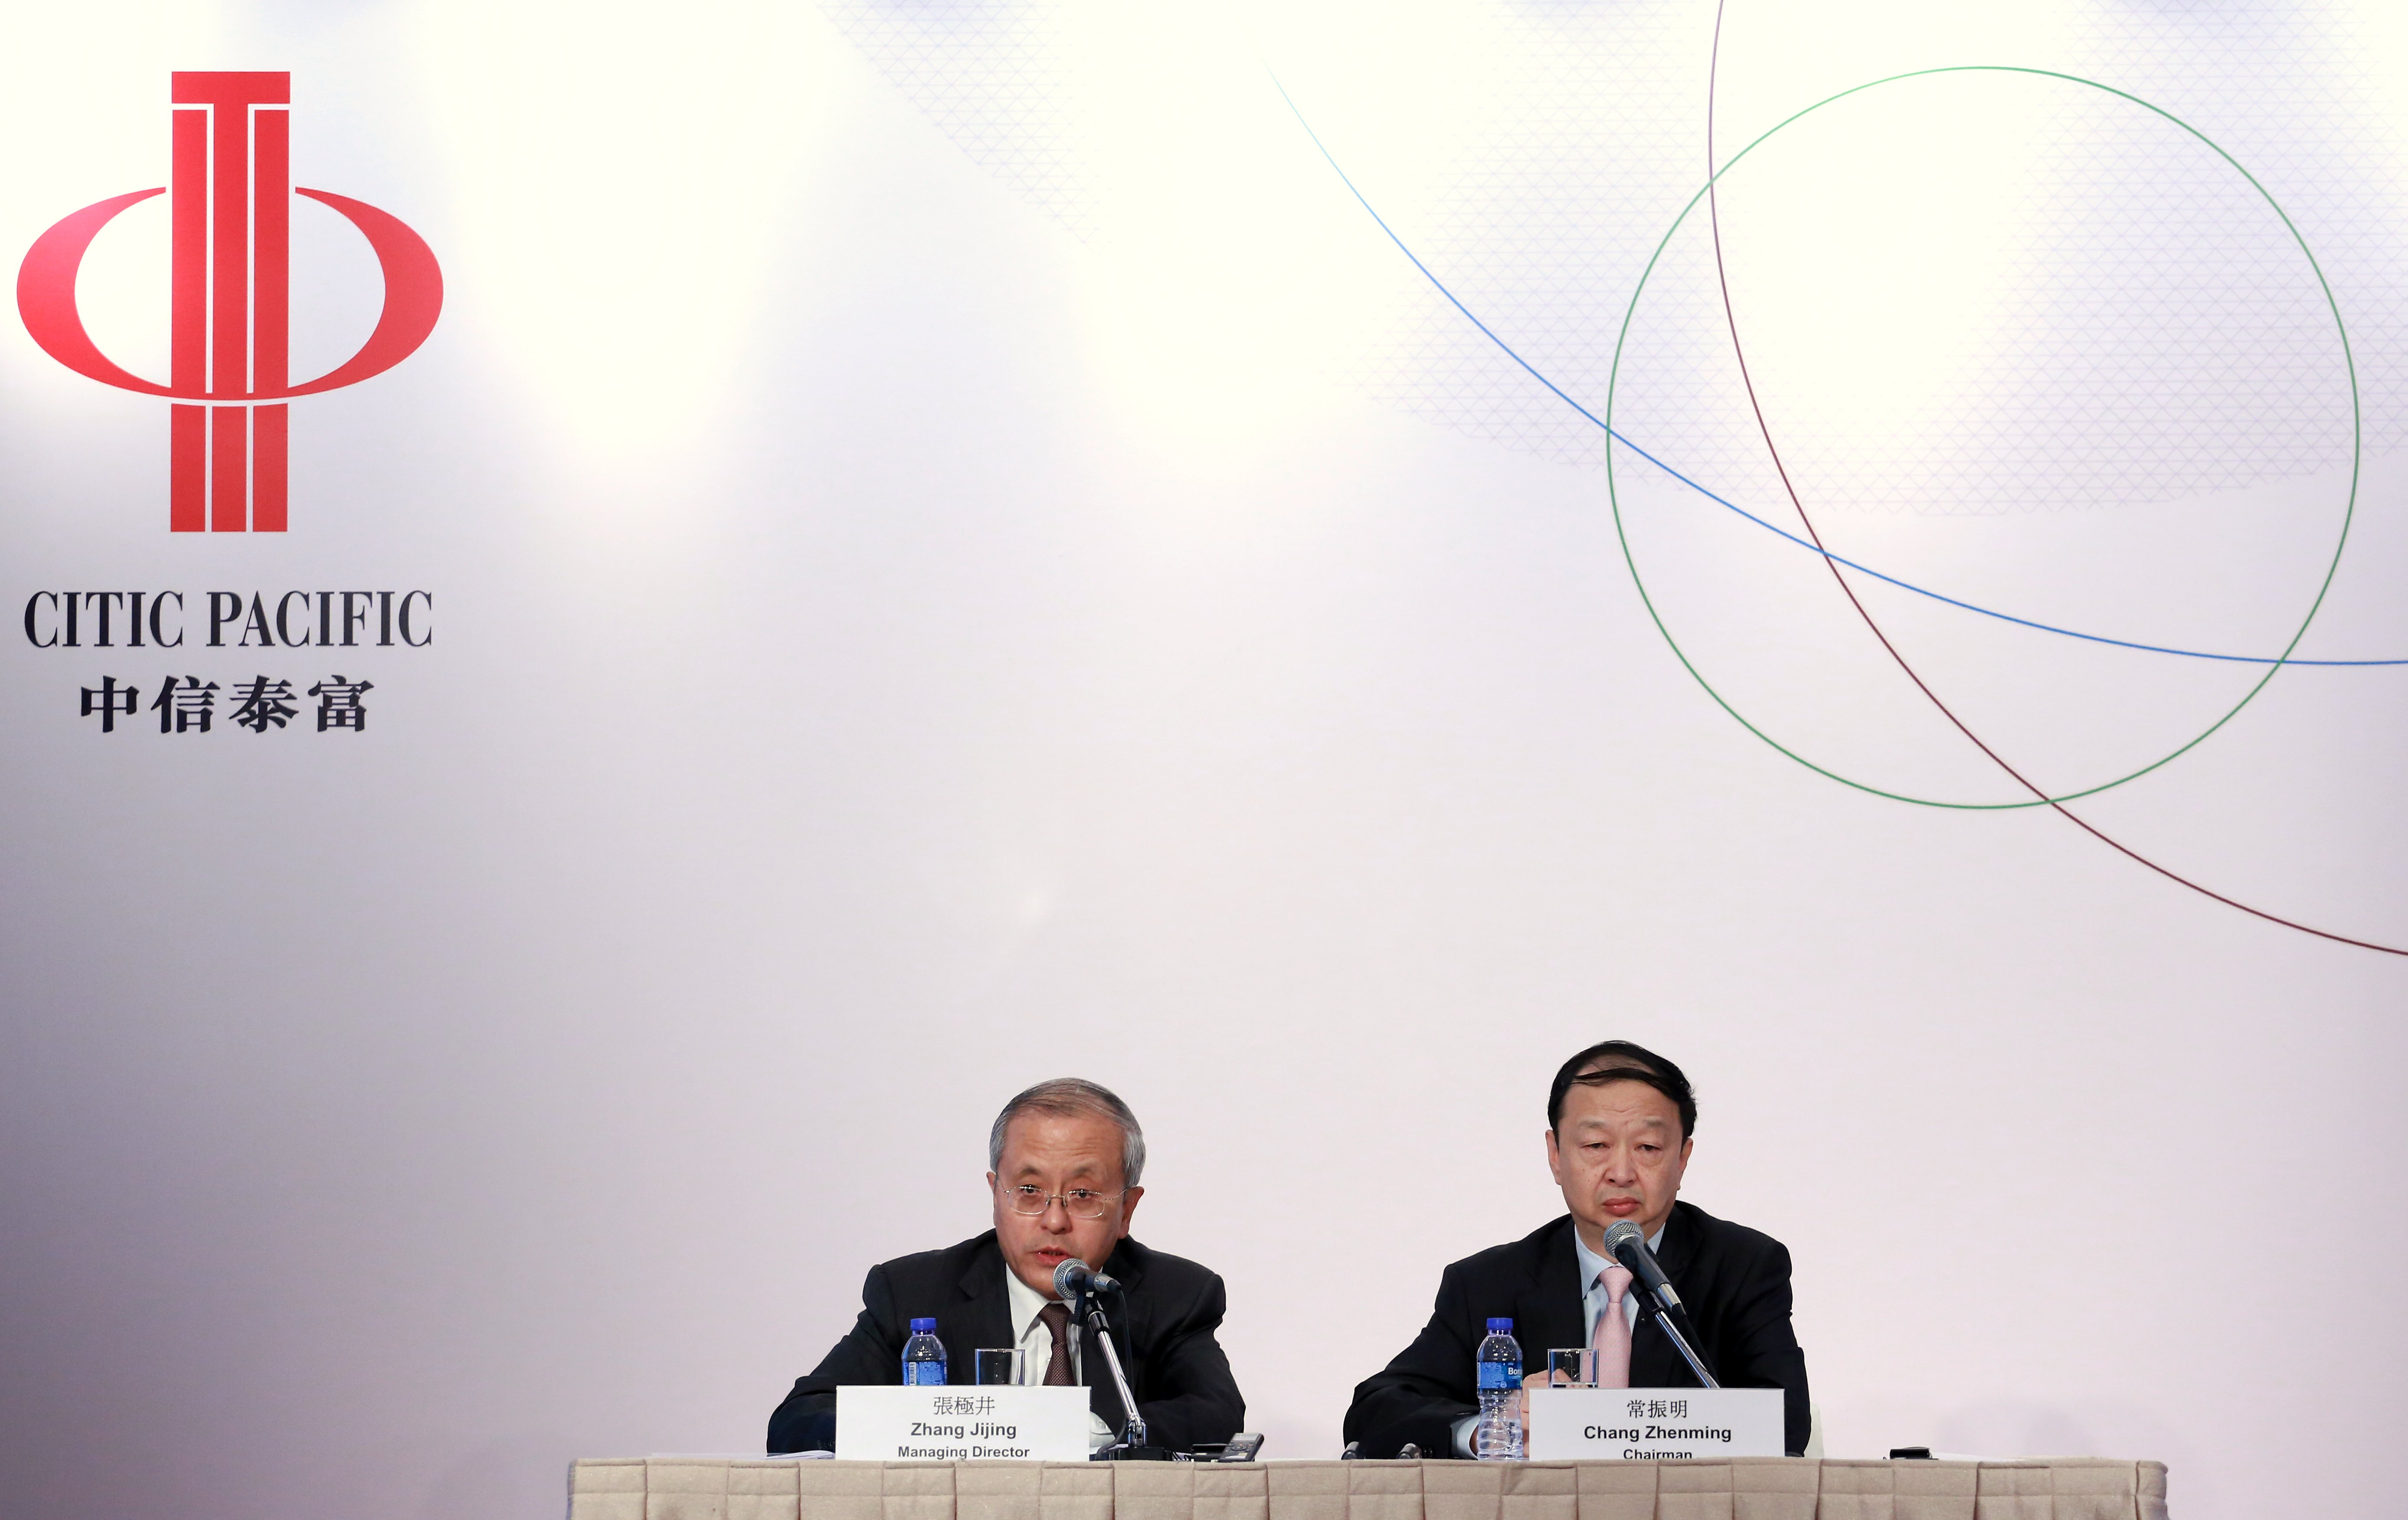 Zhang Jijing (left), Managing Director of CITIC Pacific and Chang Zhenming (right) , chairman of CITIC Pacific attend the press conference of the company's 2012 Half Year Results in Conrad Hotel, Admiralty. 16AUG12